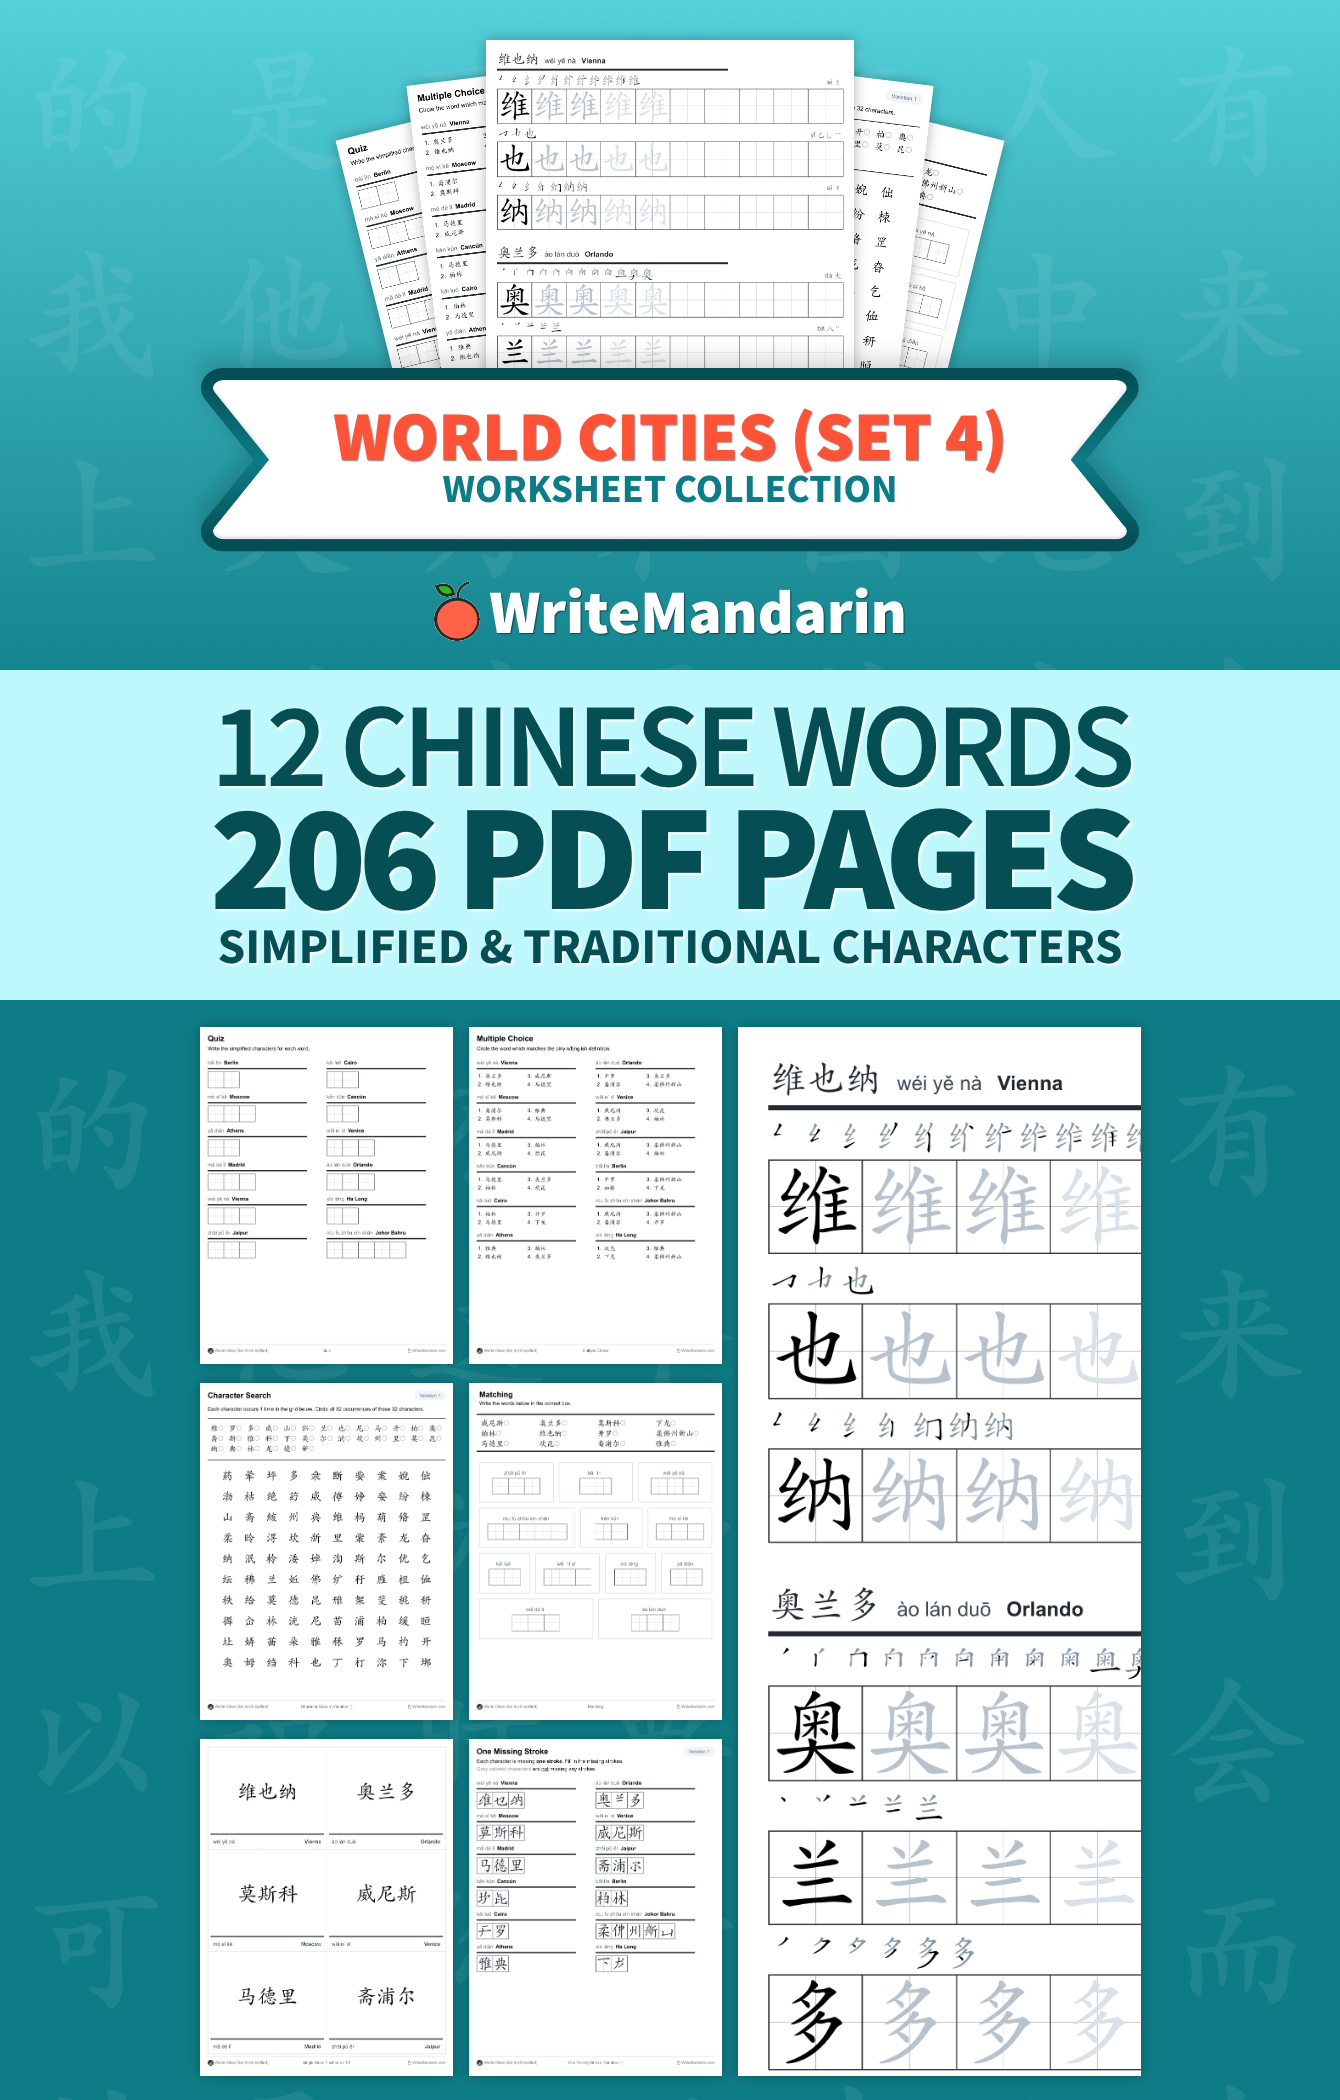 Preview image of World Cities (Set 4) worksheet collection